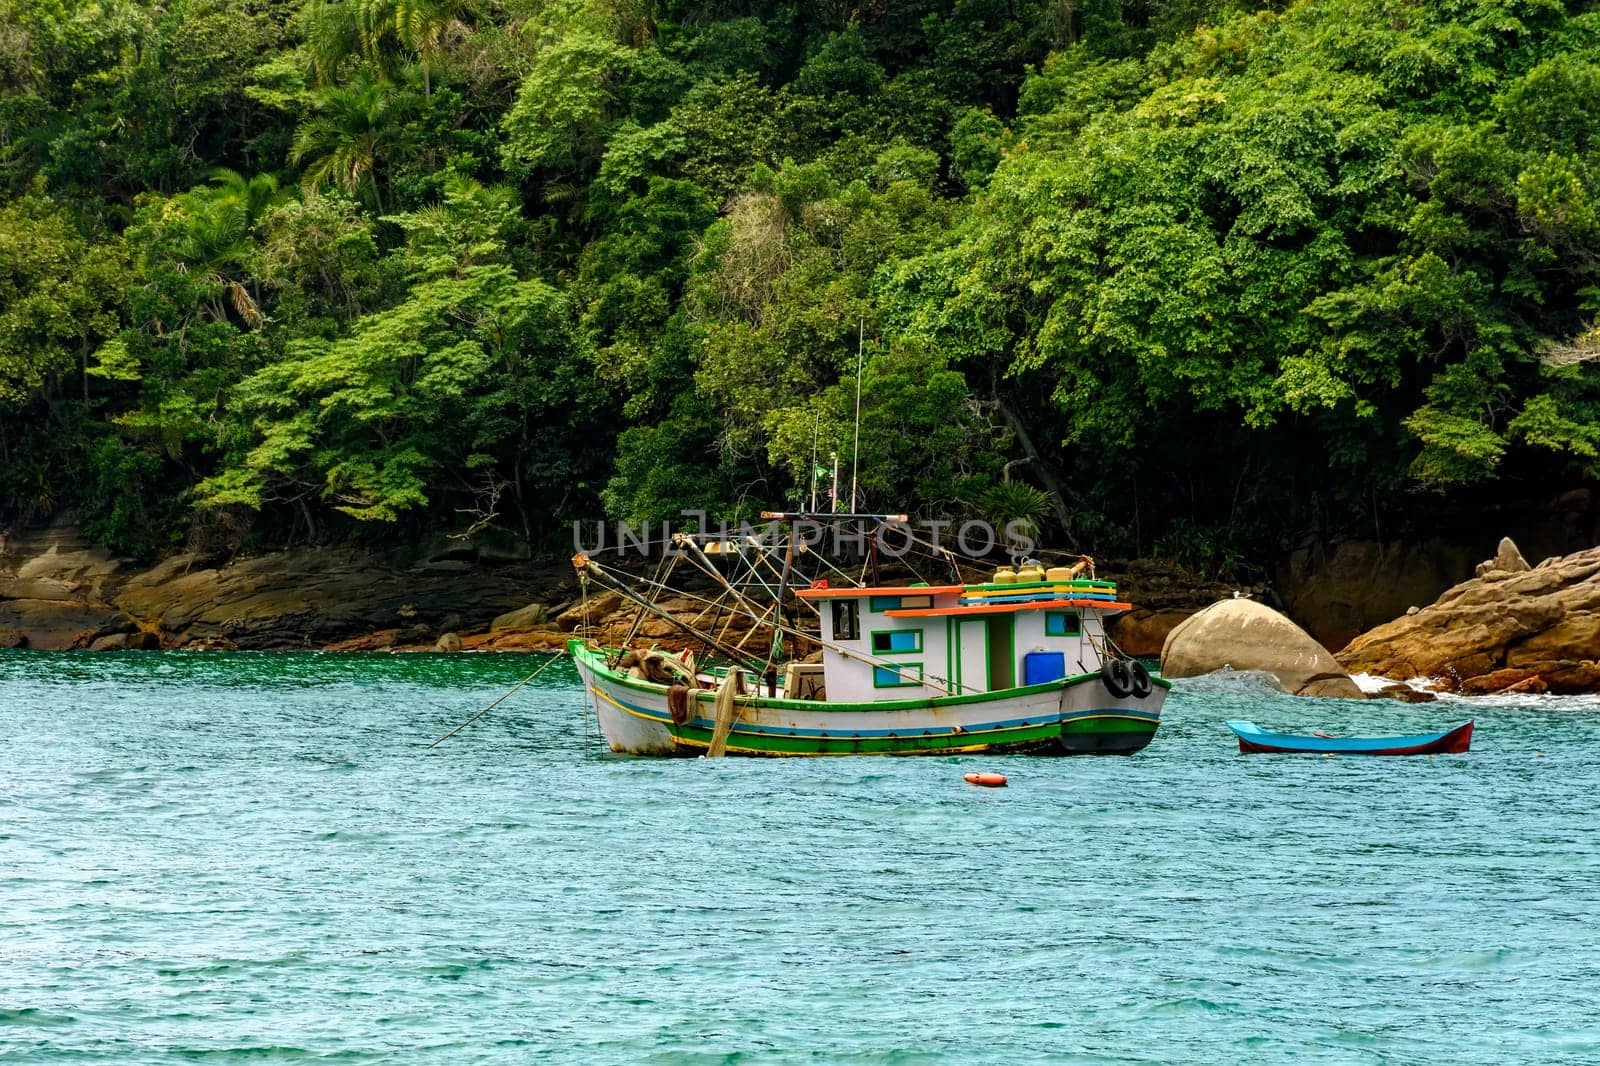 Fishing trawler anchored along the rocks and forest by Fred_Pinheiro